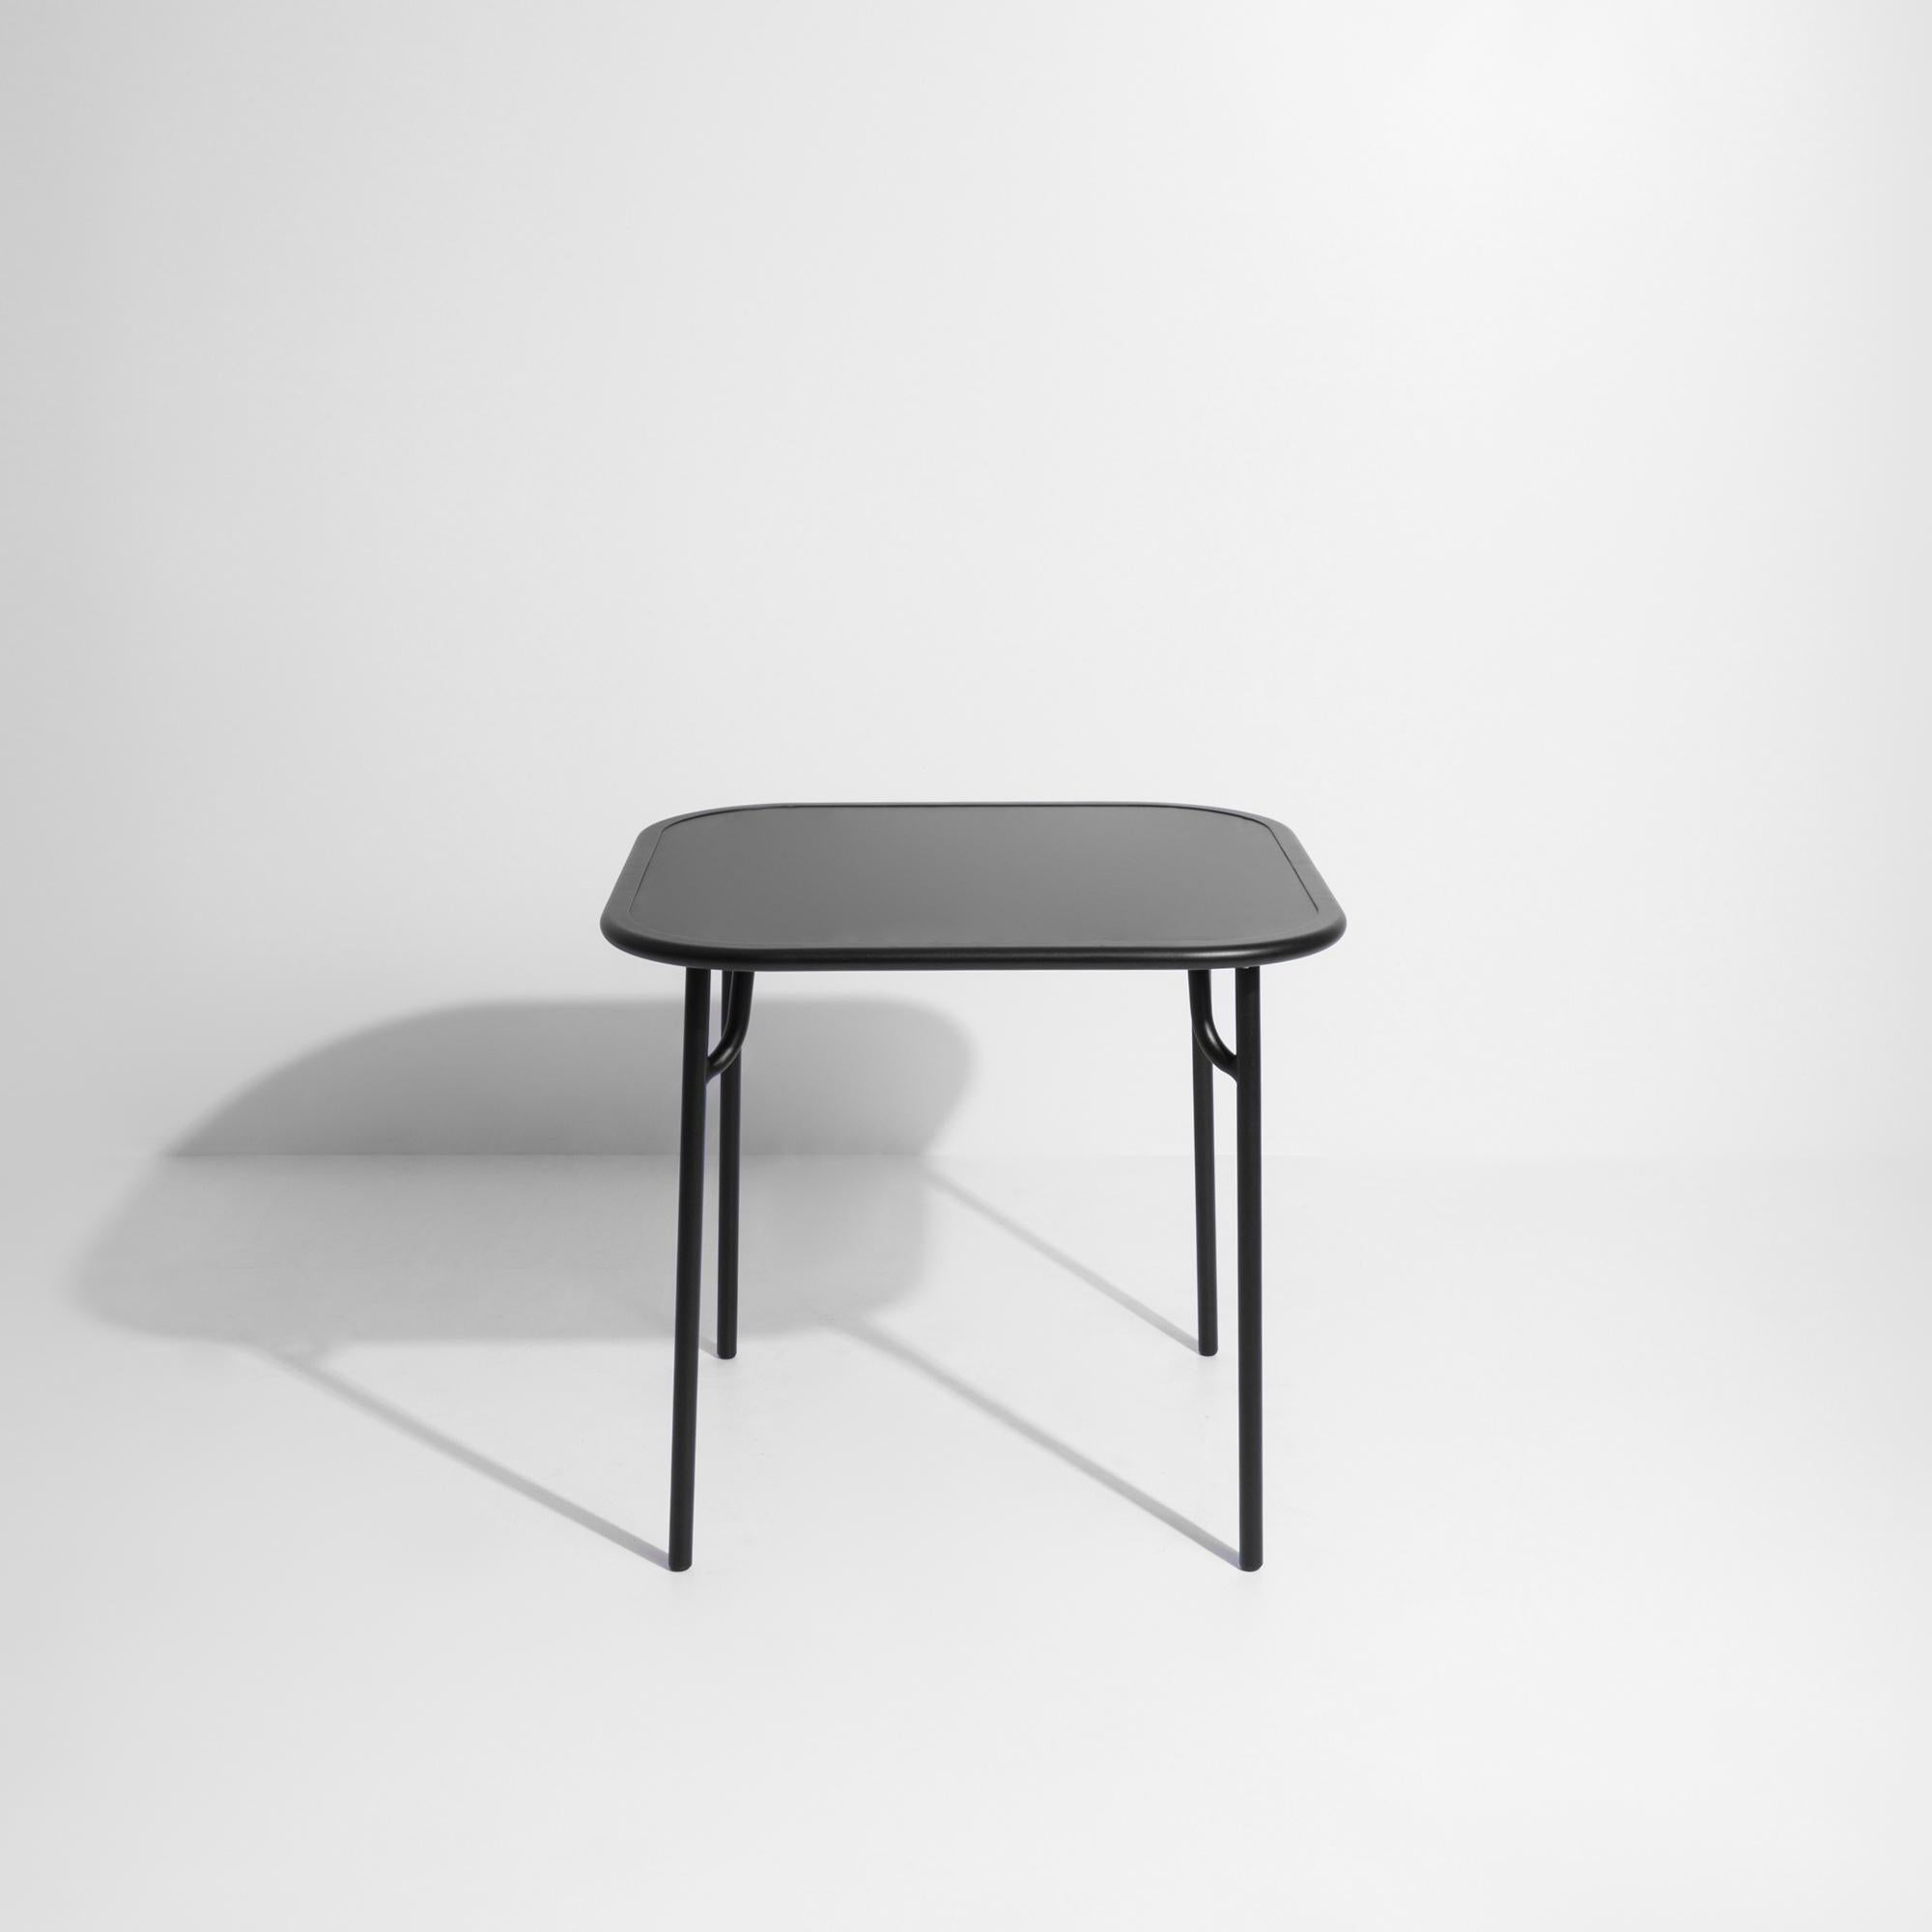 Petite Friture Week-End Plain Square Dining Table in Black Aluminium, 2017 In New Condition For Sale In Brooklyn, NY